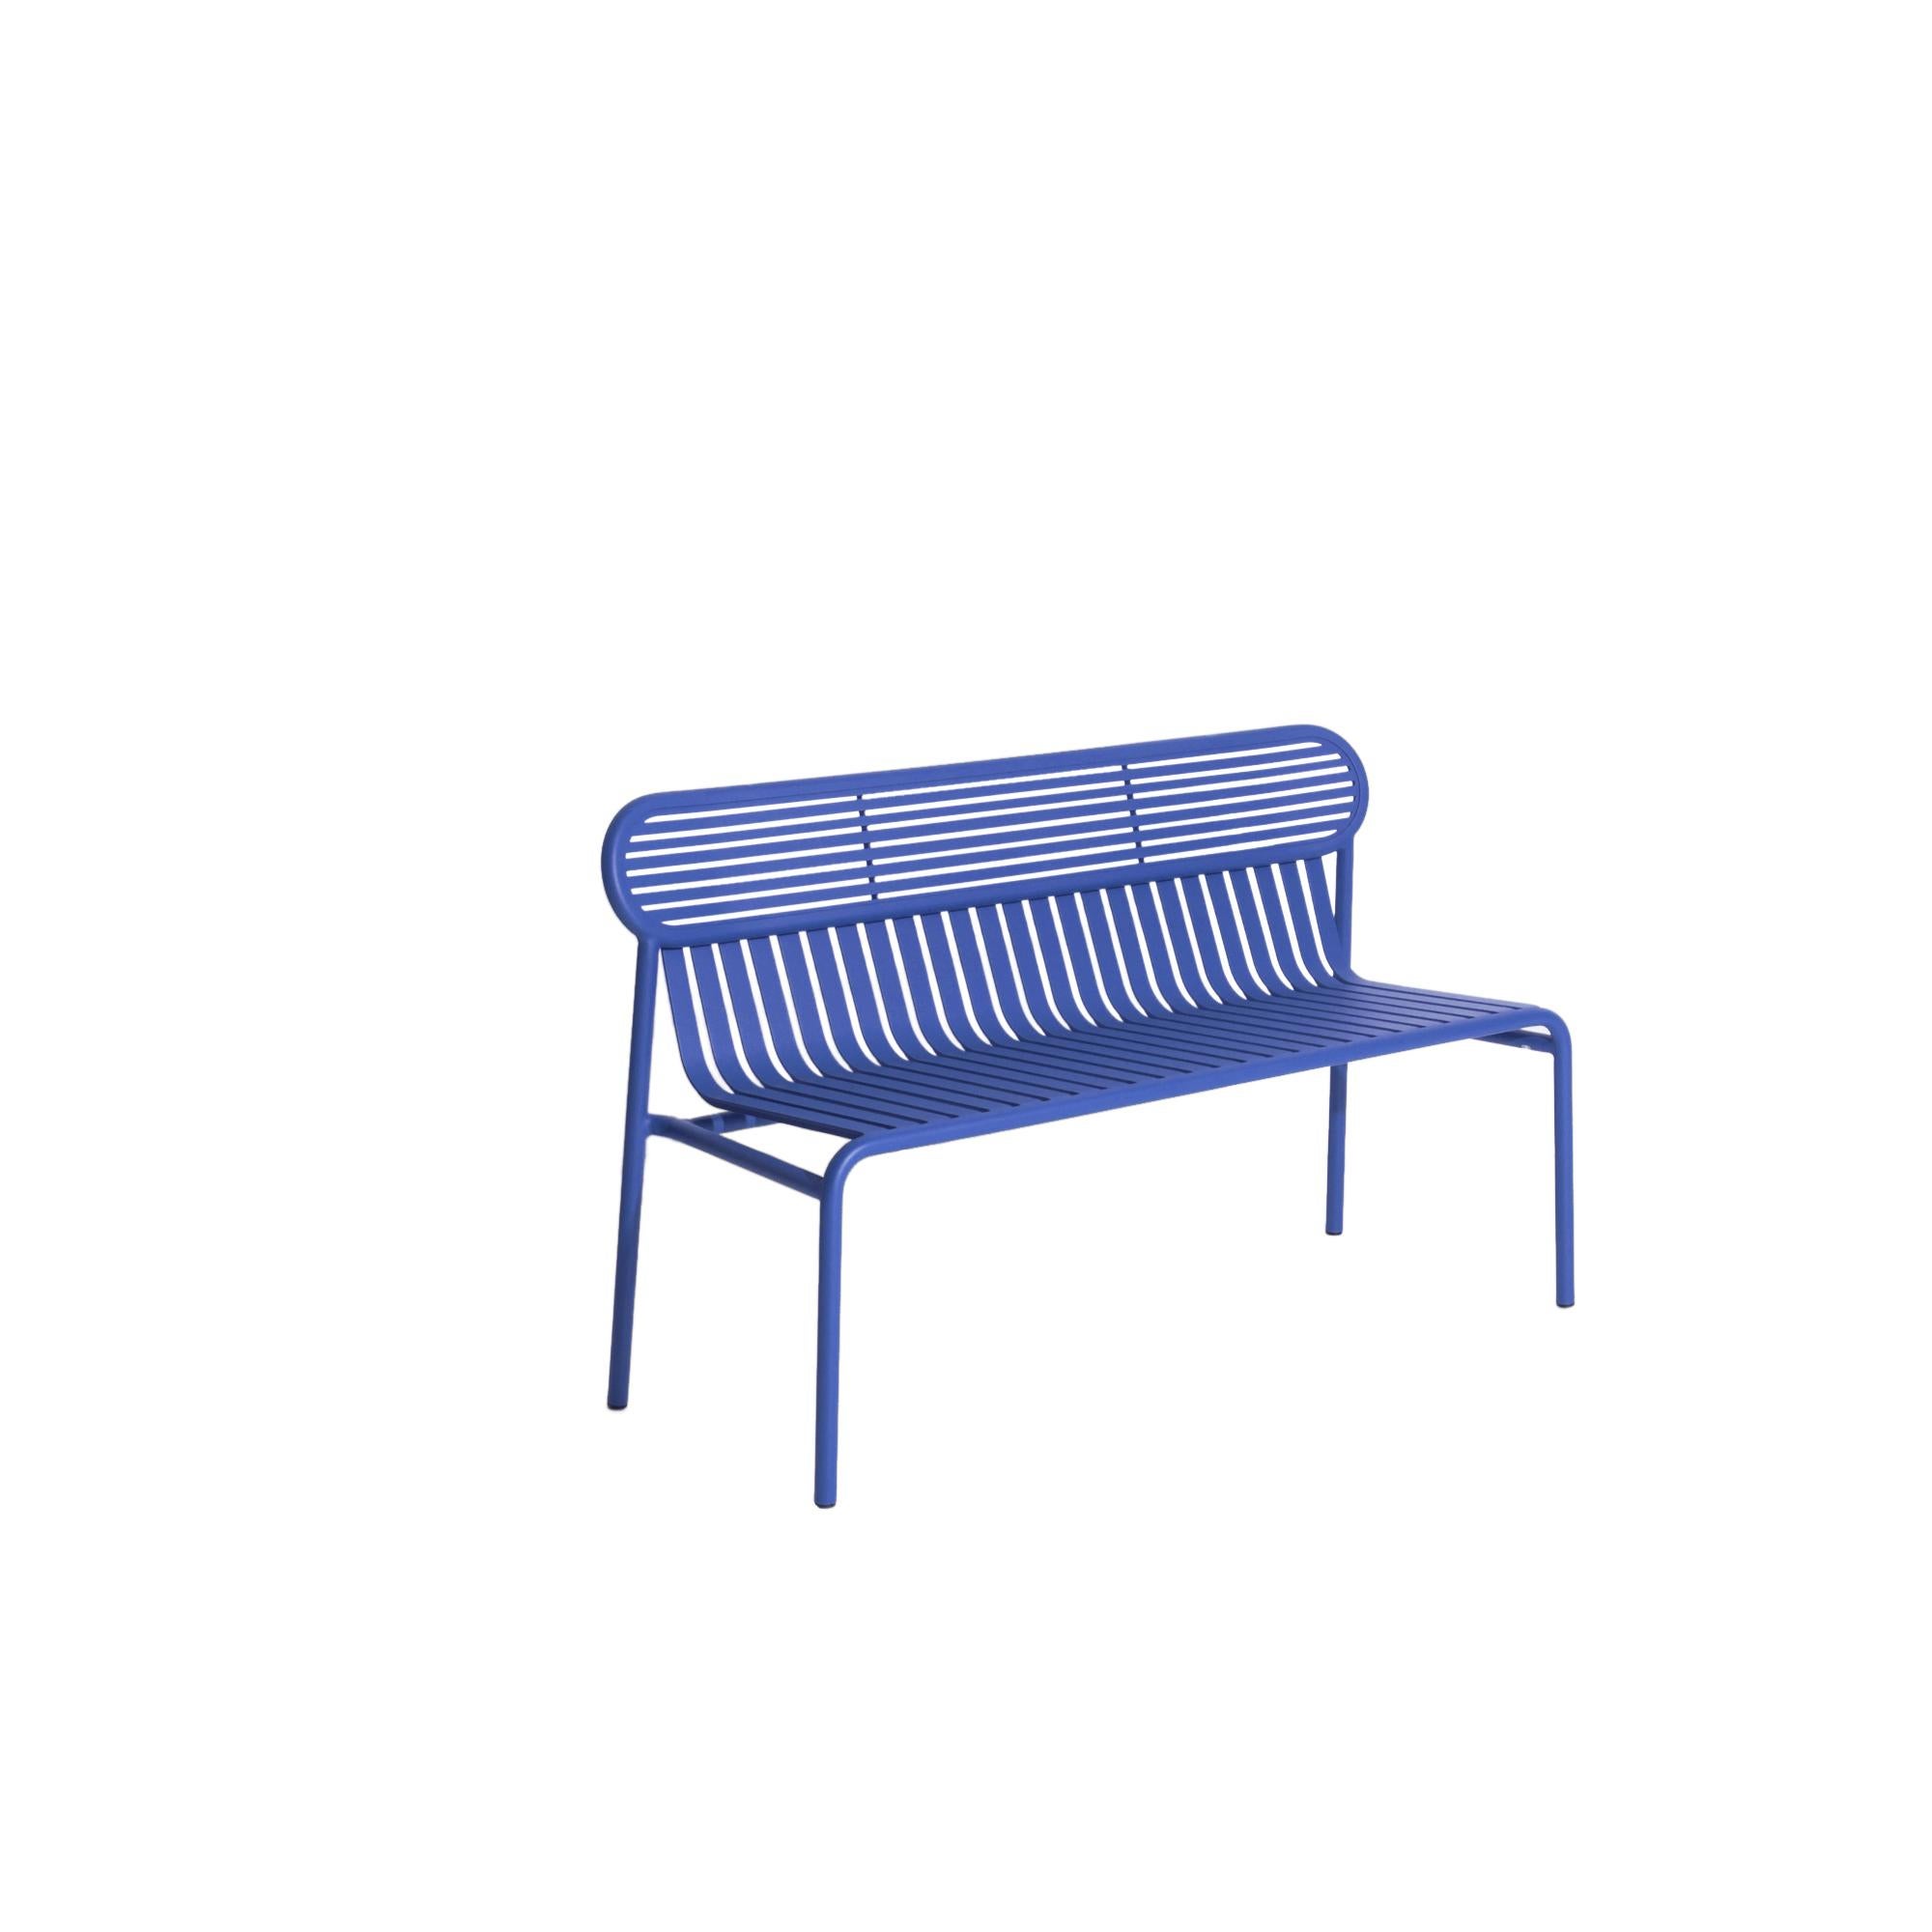 Petite Friture Week-End Bench in Blue Aluminium by Studio BrichetZiegler, 2017

The week-end collection is a full range of outdoor furniture, in aluminium grained epoxy paint, matt finish, that includes 18 functions and 8 colours for the retail